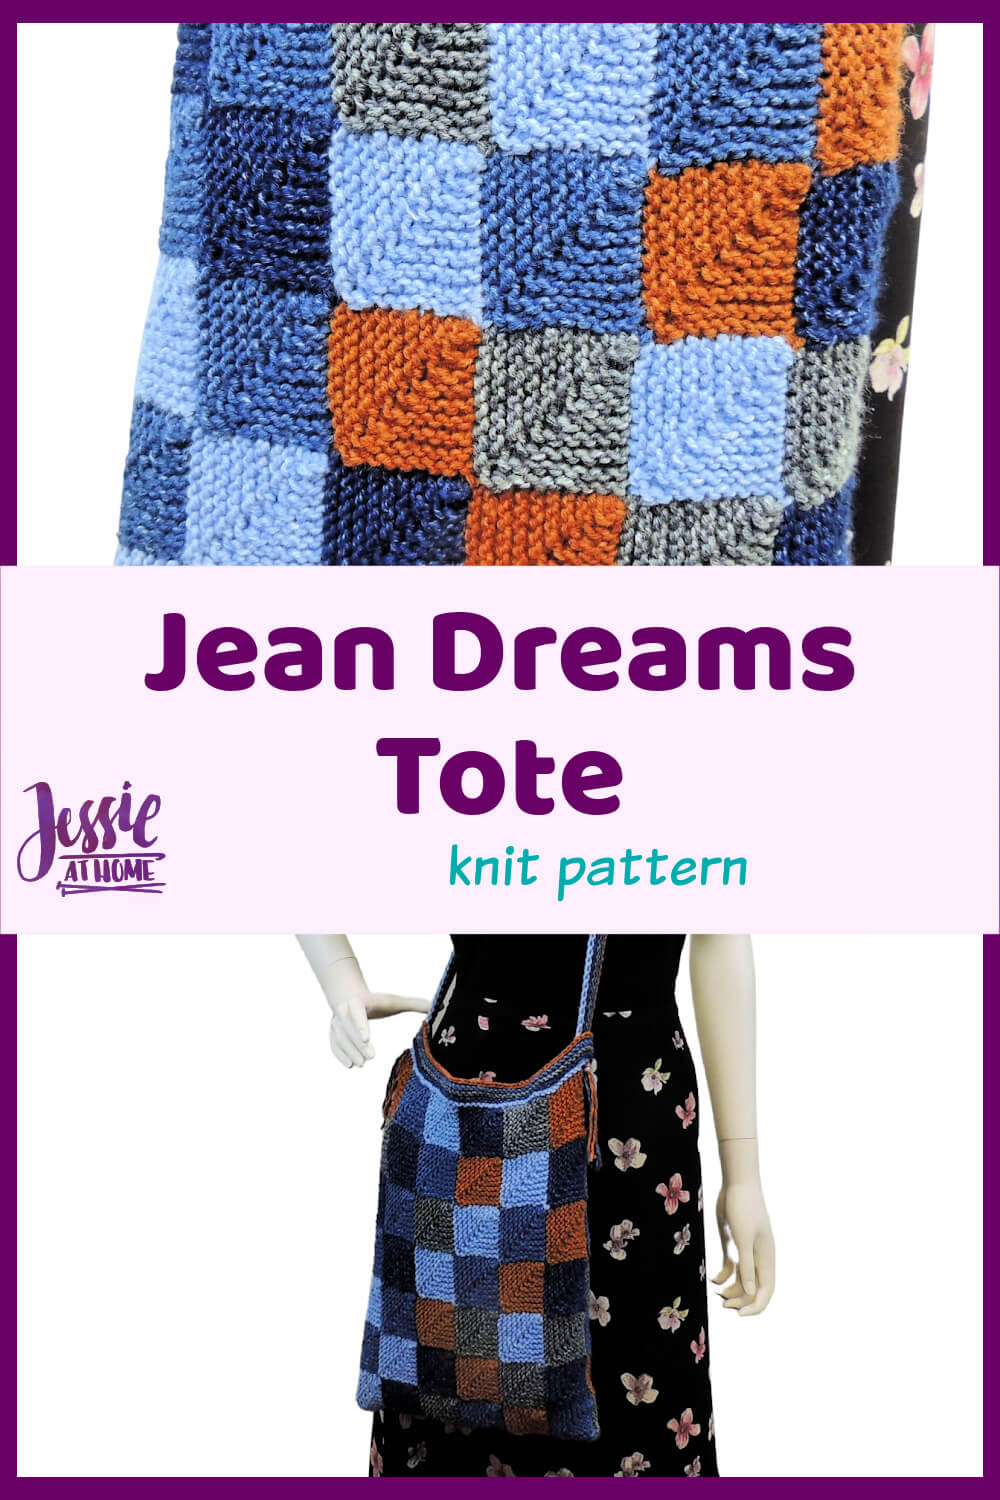 Denim Knit Pattern - Jean Dreams Tote - carry what you need in style!